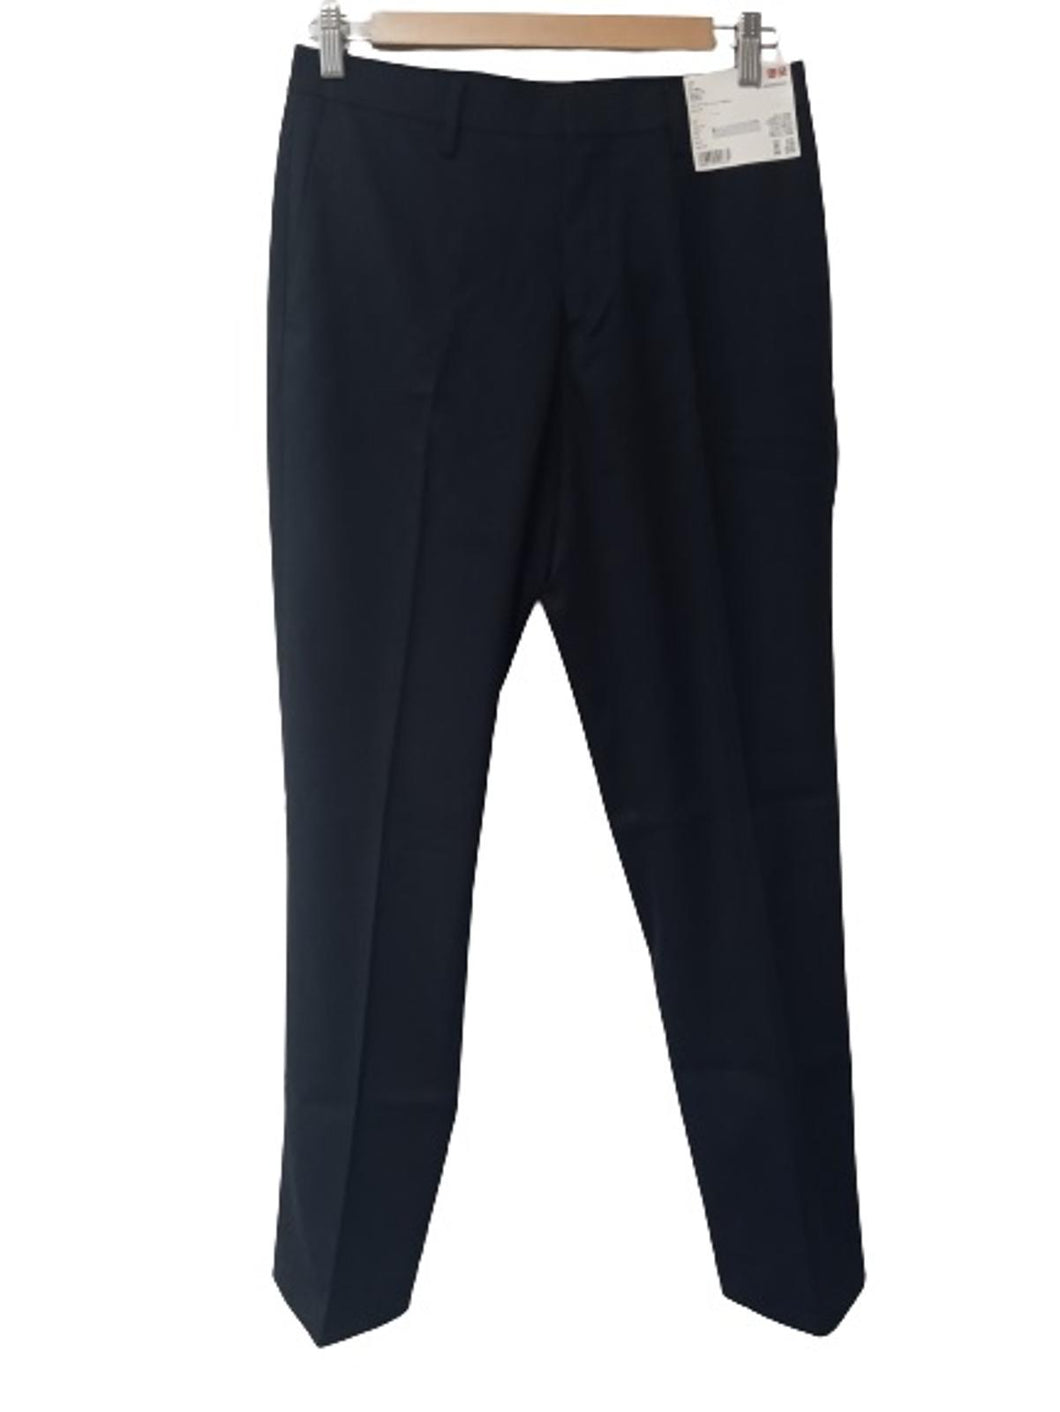 UNIQLO Men's Navy Blue Zip Fly Easy Care Slim Fit Trousers Size UK W29L34 NEW